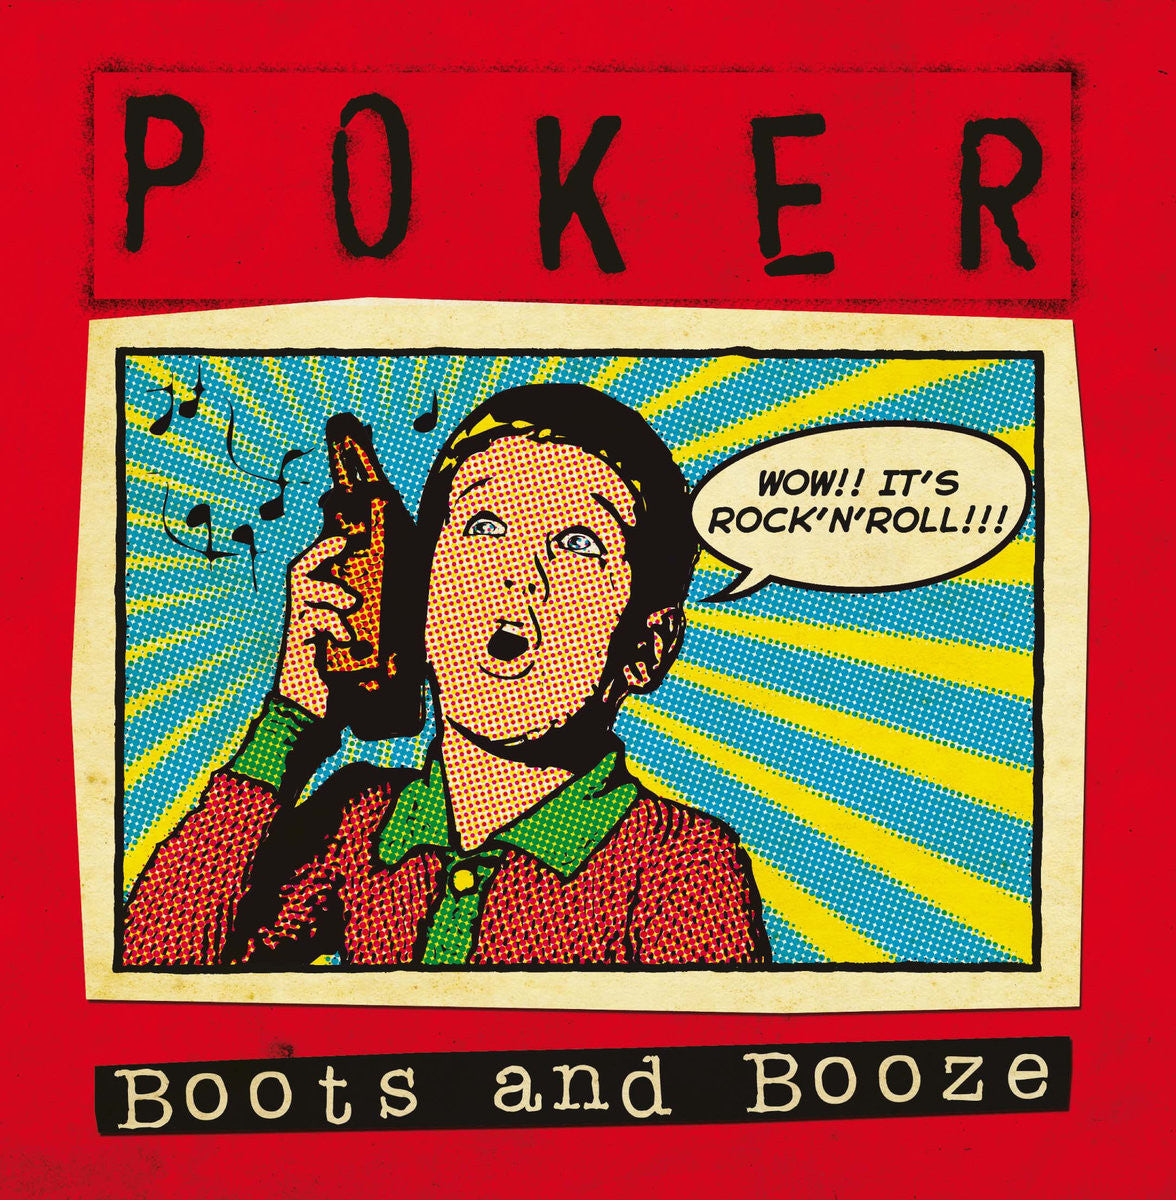 Poker - Boots and Booze 7" ~ALLEYCATS!